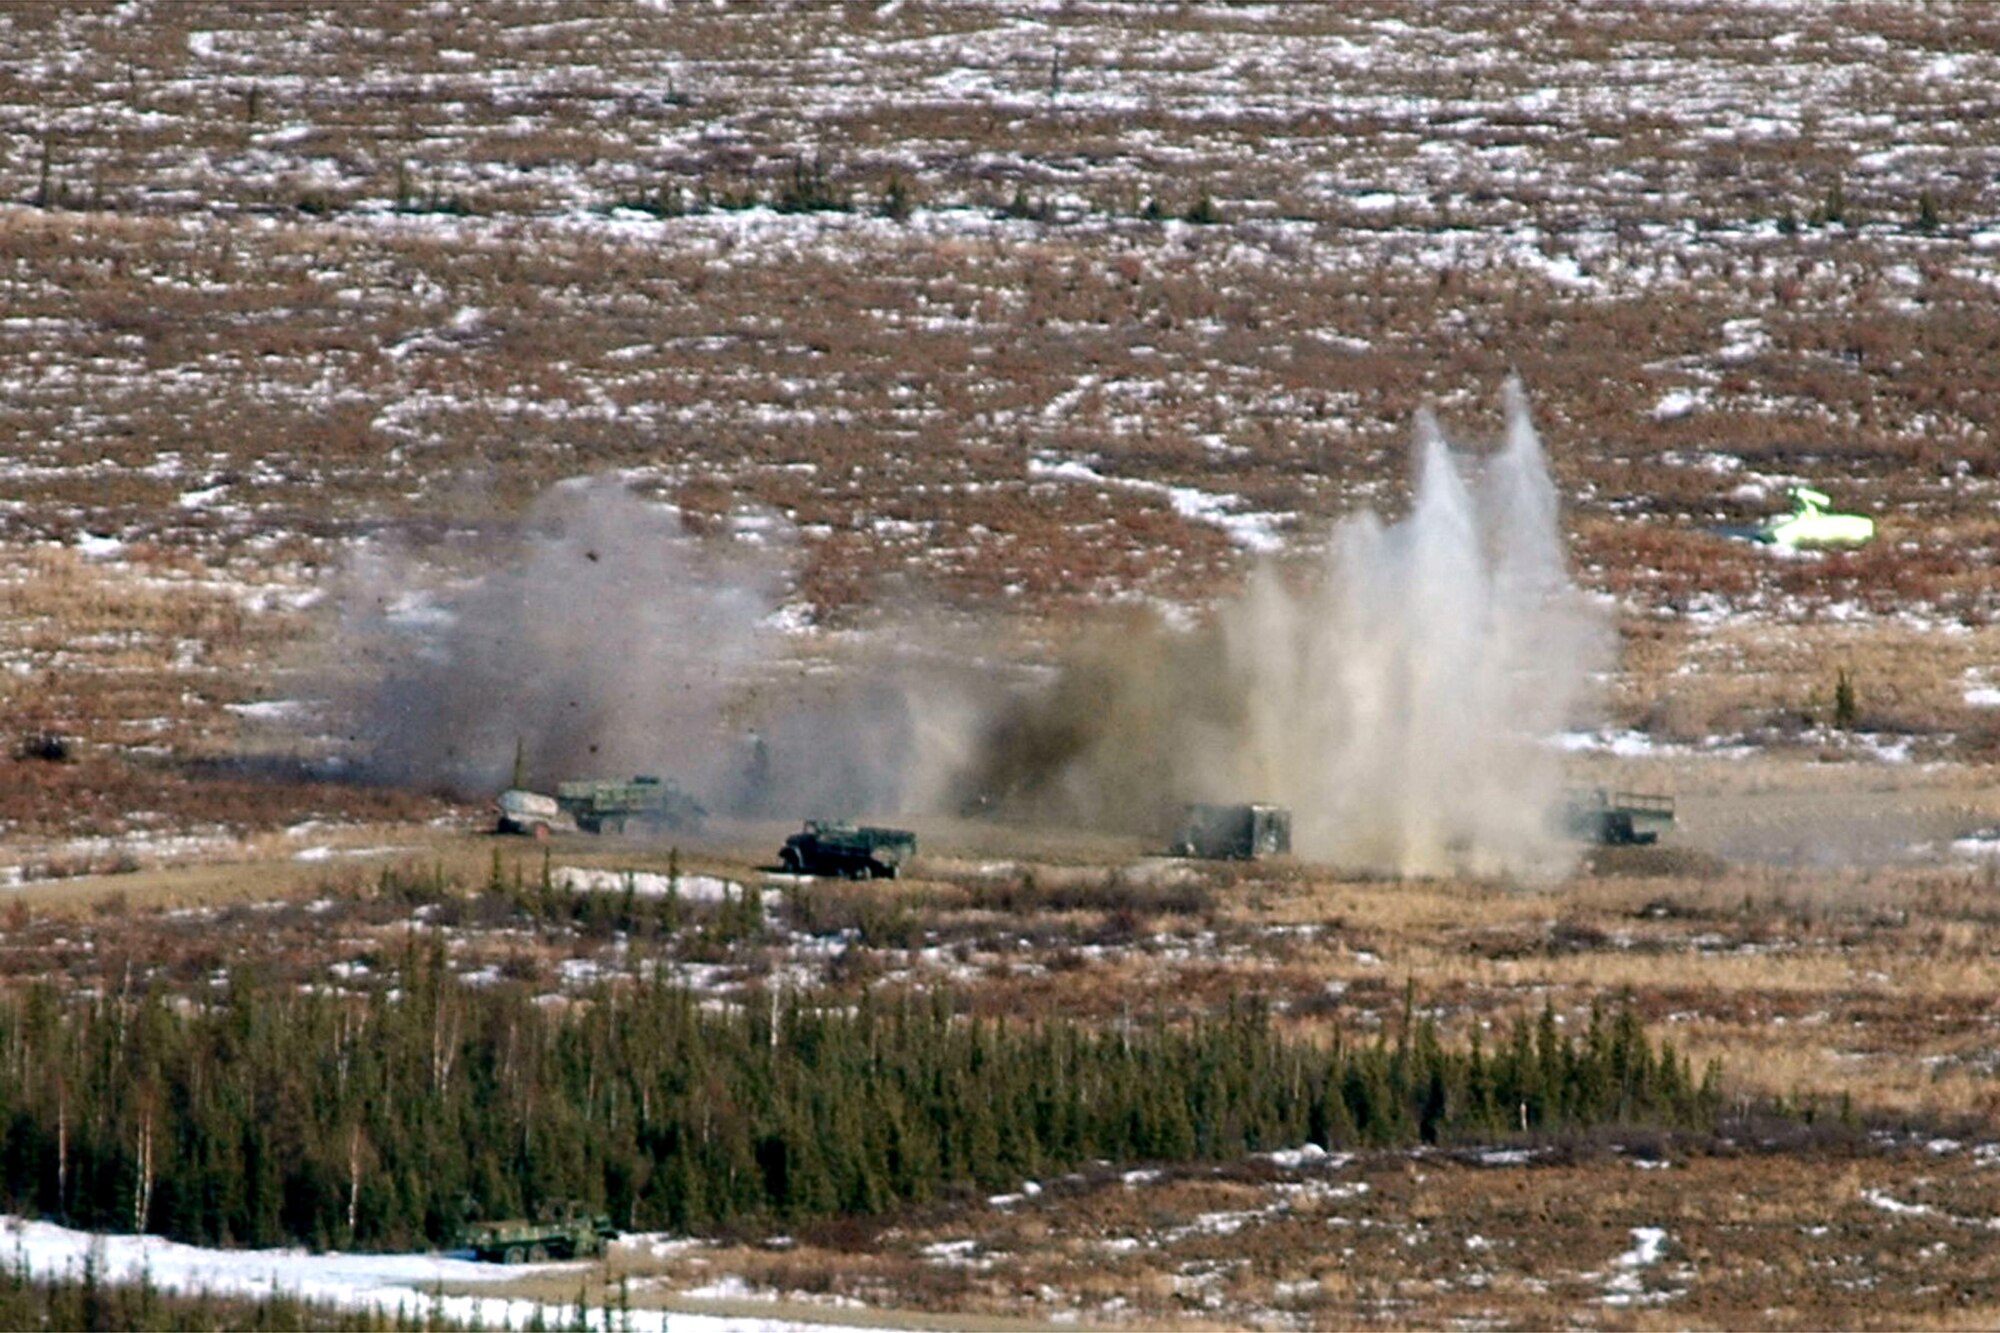 An A-10 Thunderbolt II pilot strafes a "hostile" convoy at the bombing range at Eielson Air Force Base, Alaska, on Friday, April 28, 2006, during Red Flag-Alaska. Joint terminal attack controllers from the 25th Air Support Operations Squadron at Hickam AFB, Hawaii, called in air support and directed planes to their targets as part of the exercise. The A-10 is from the 75th Fighter Squadron at Pope AFB, N.C. (U.S. Air Force photo/Tech. Sgt. Jeff Walston)